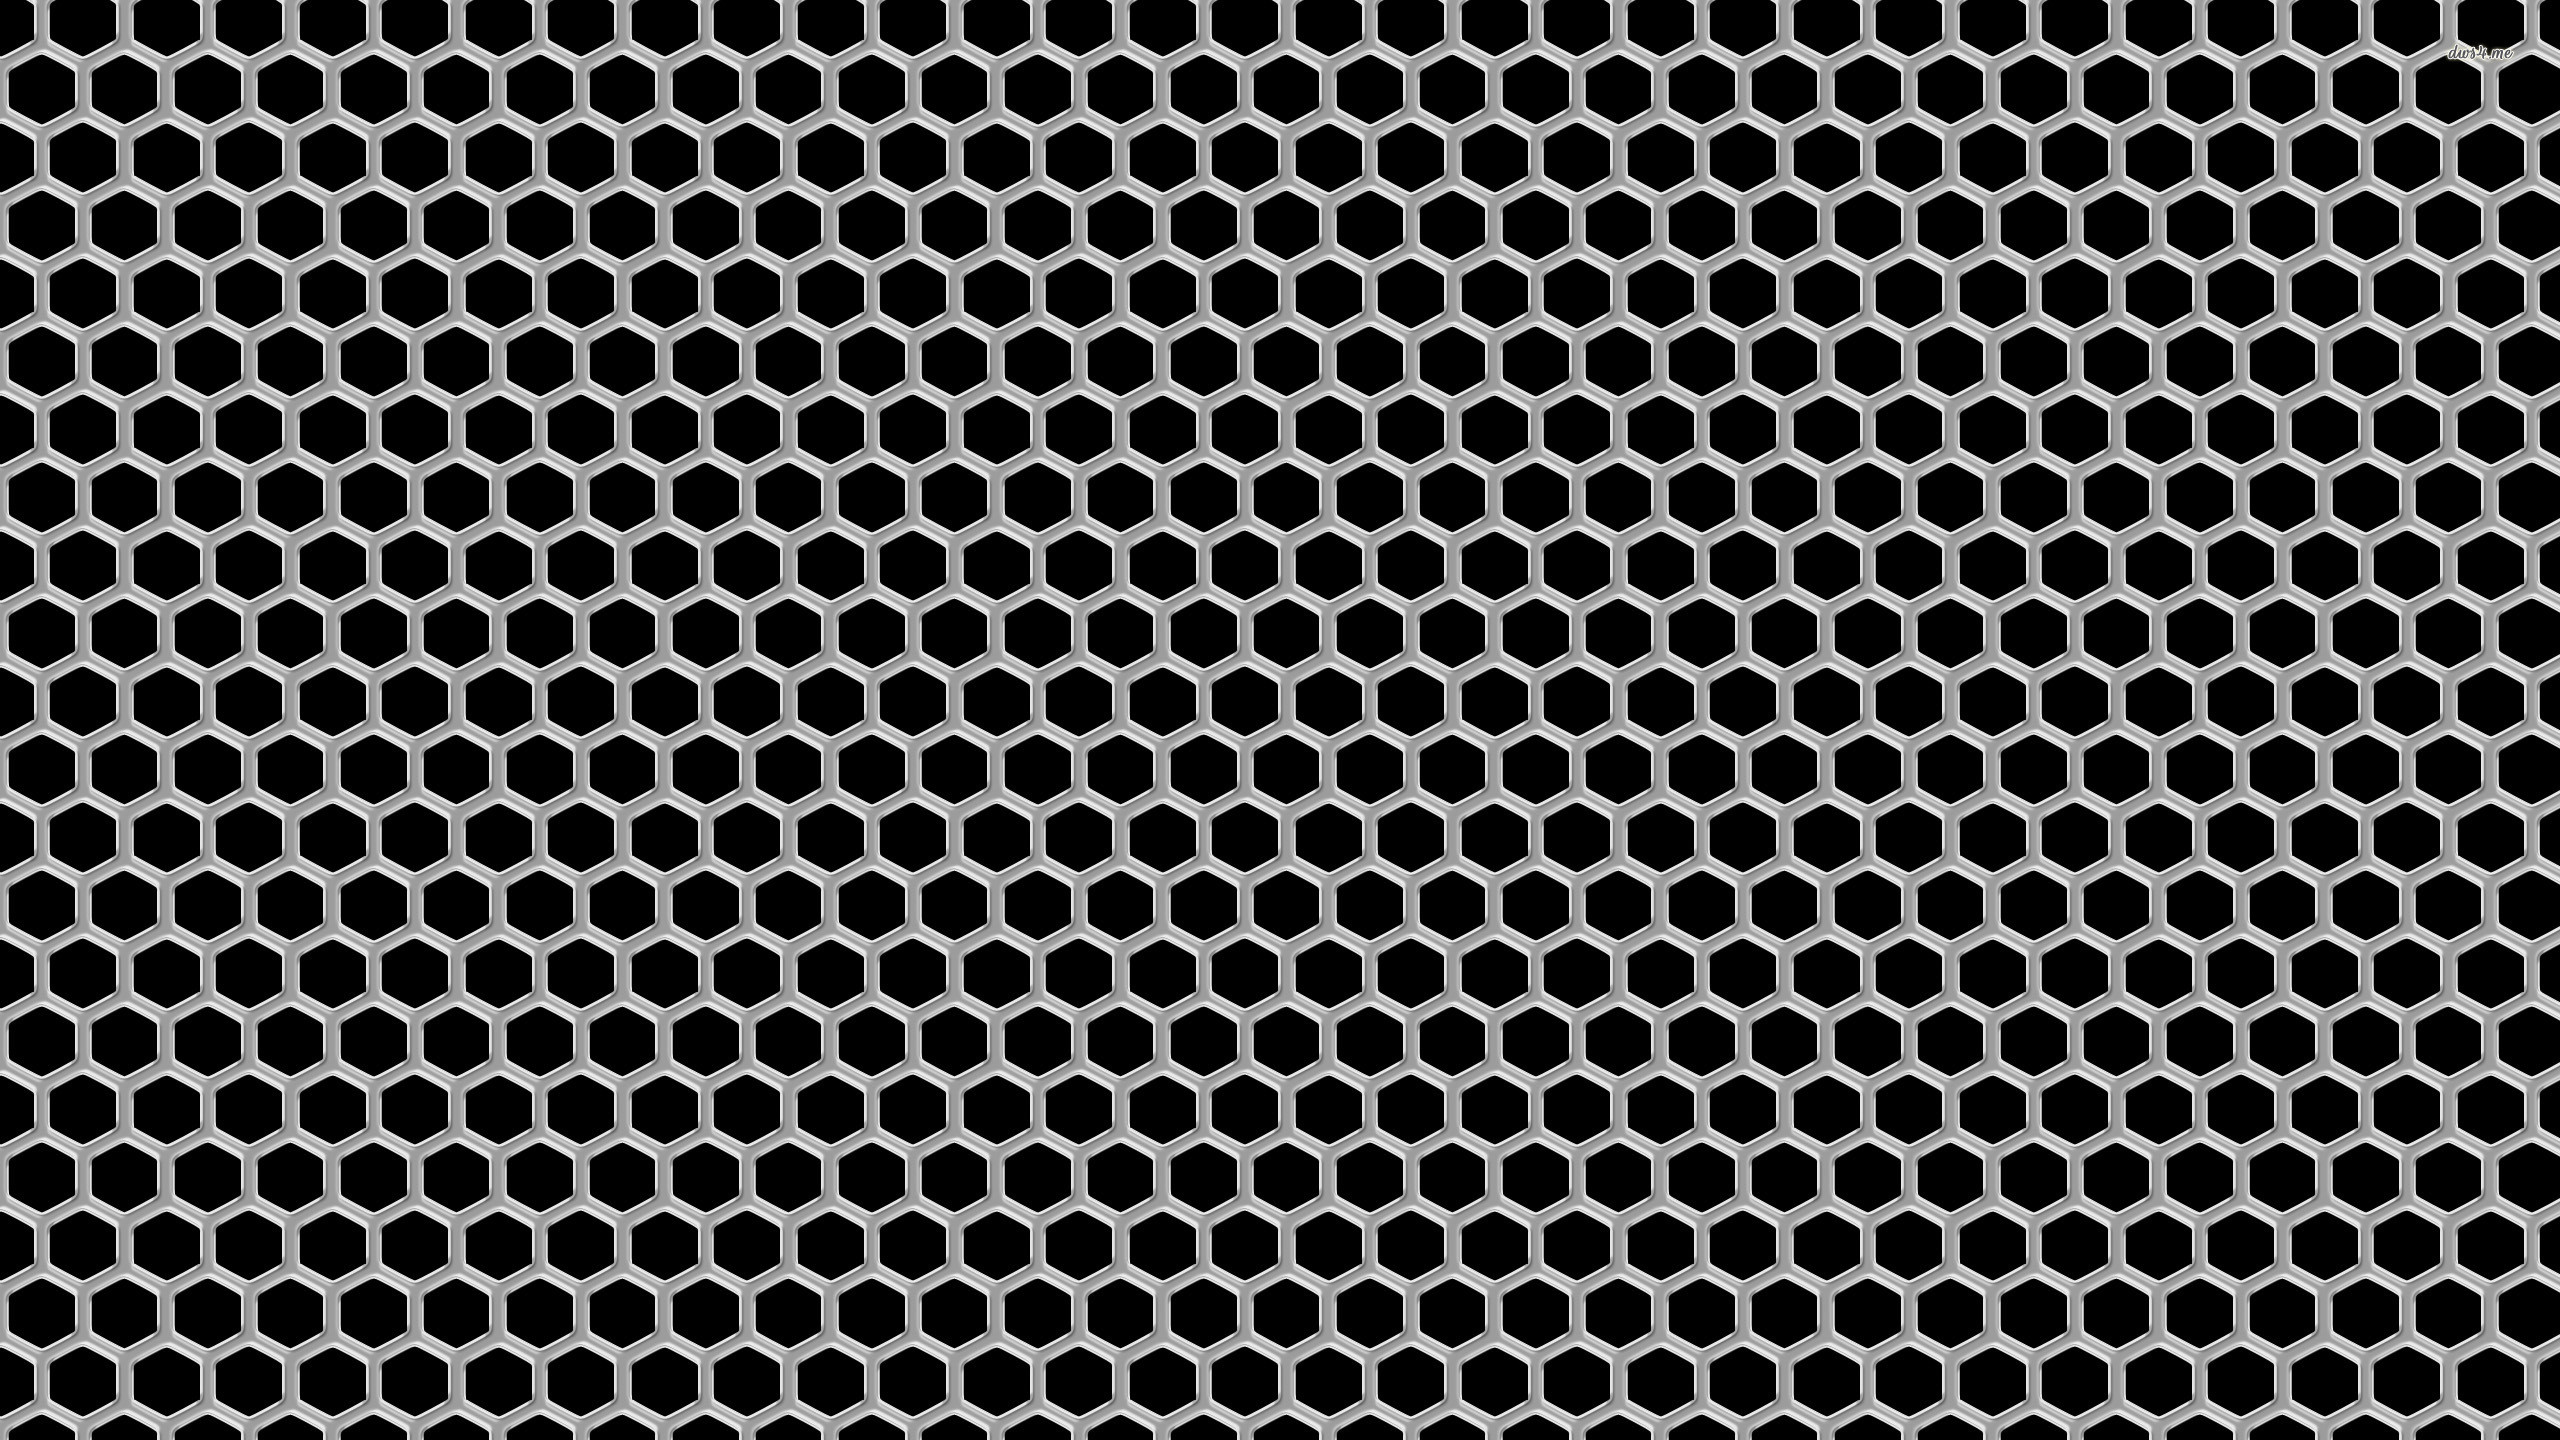 2560x1440 Honeycomb pattern wallpaper - Abstract wallpapers - #39092